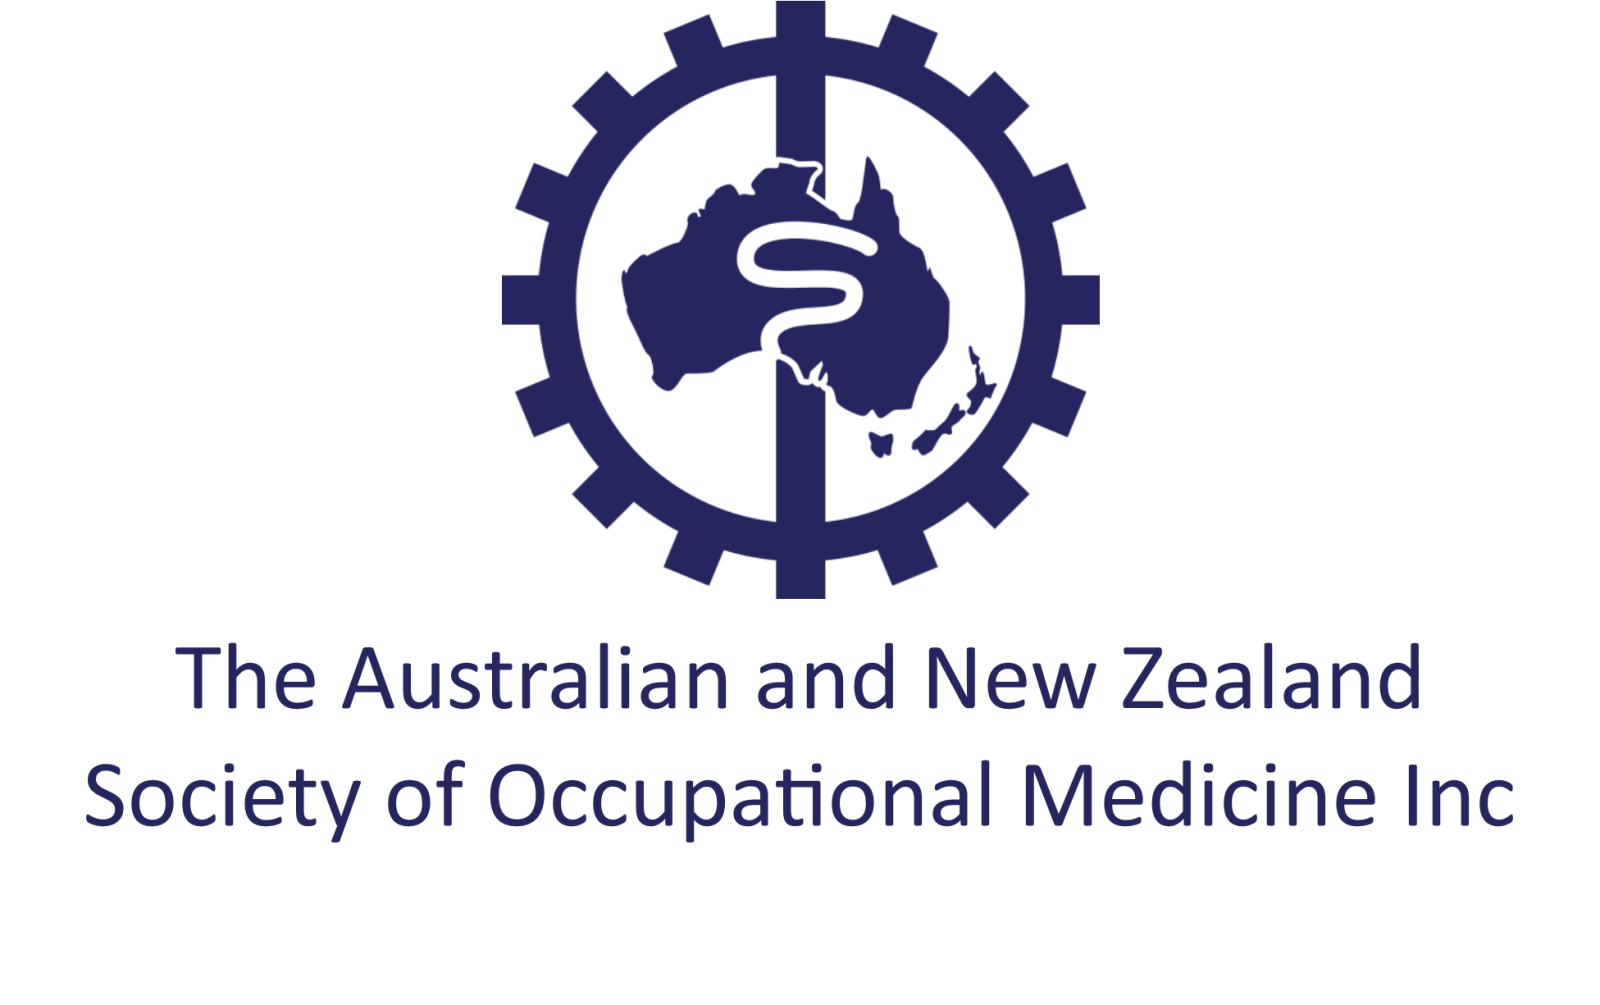 The Australian and New Zealand Society of Occupational Medicine